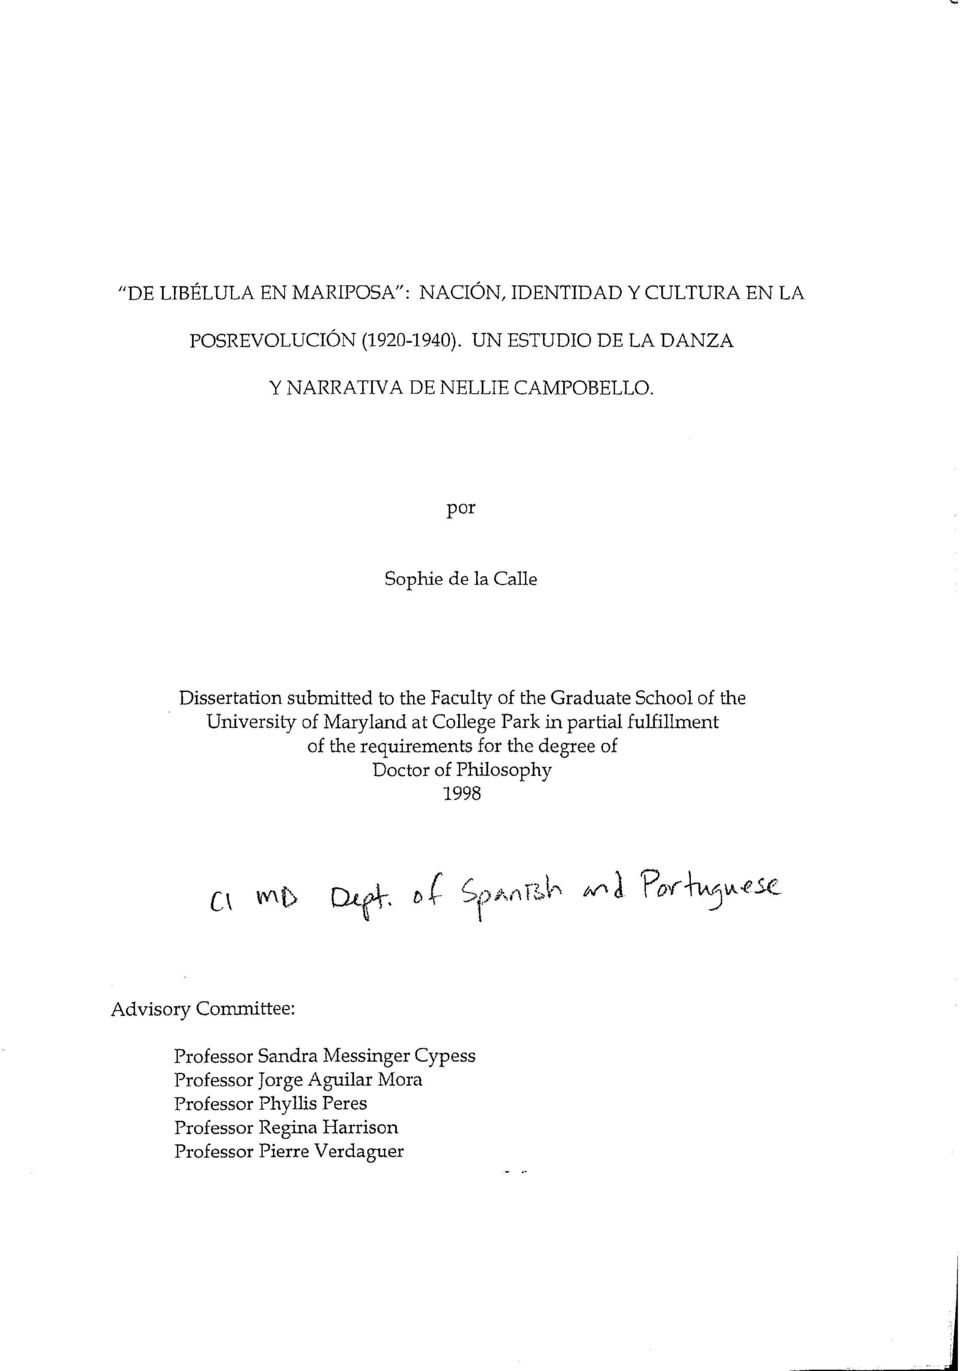 por Sophie de la Calle Dissertation submitted to the Faculty of the Graduate School of the University of Maryland at College Park